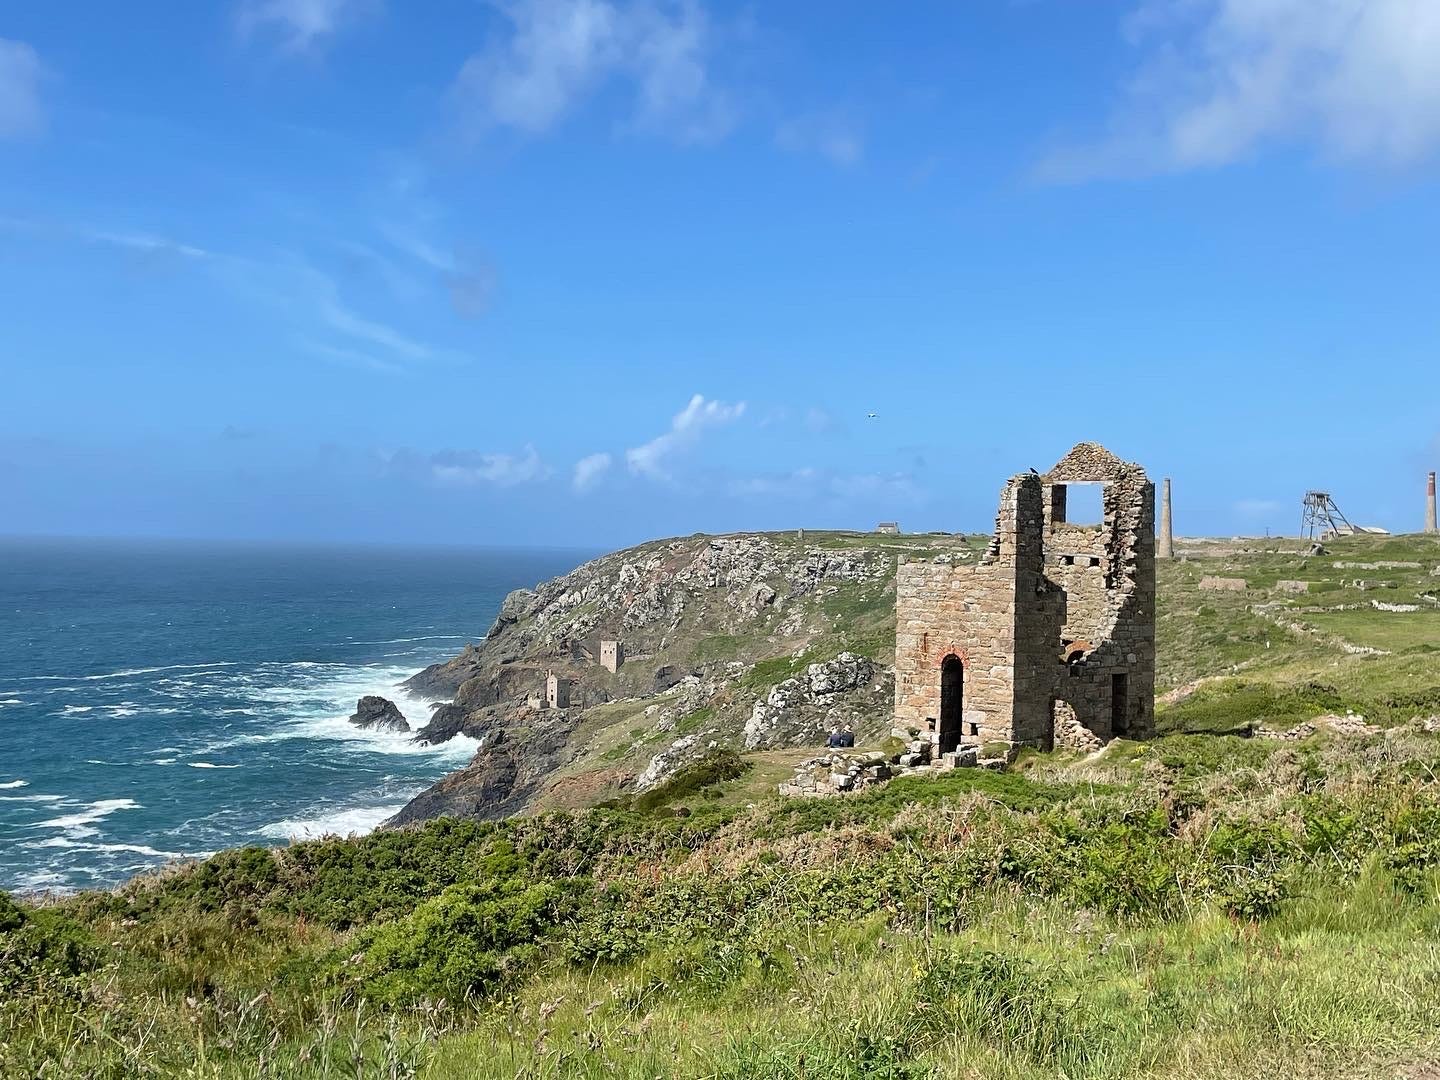 Colour photo of the Cornwall coast with the ruins of Wheal Edward mine in the foreground and Botallack mine in the distance 